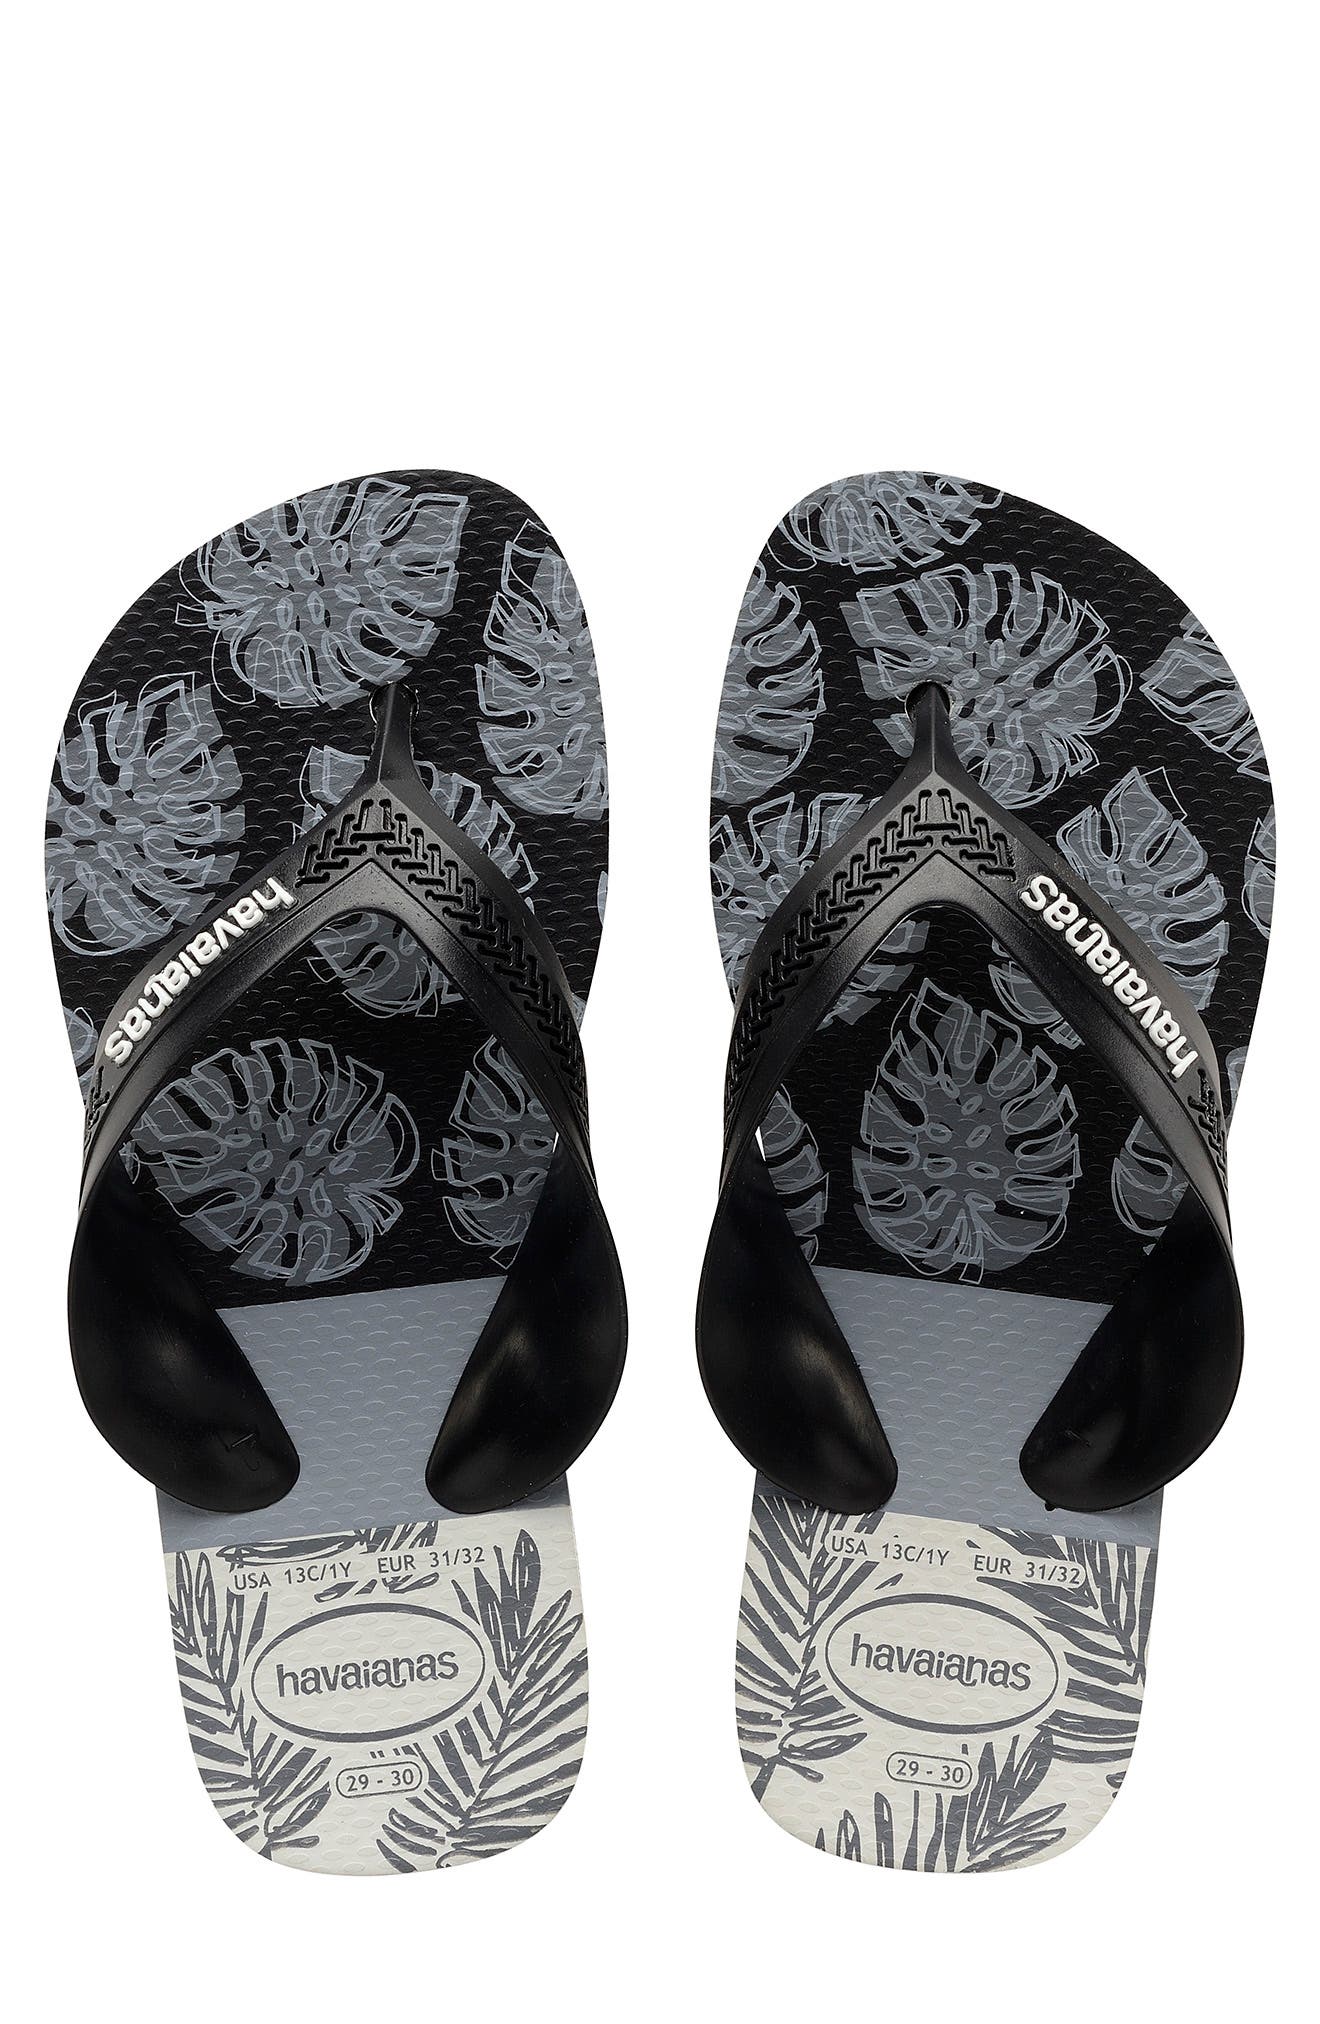 Adult and Youth sizes HAVAIANAS "TOP" MEN'S and BOY'S FLIP FLOPS 